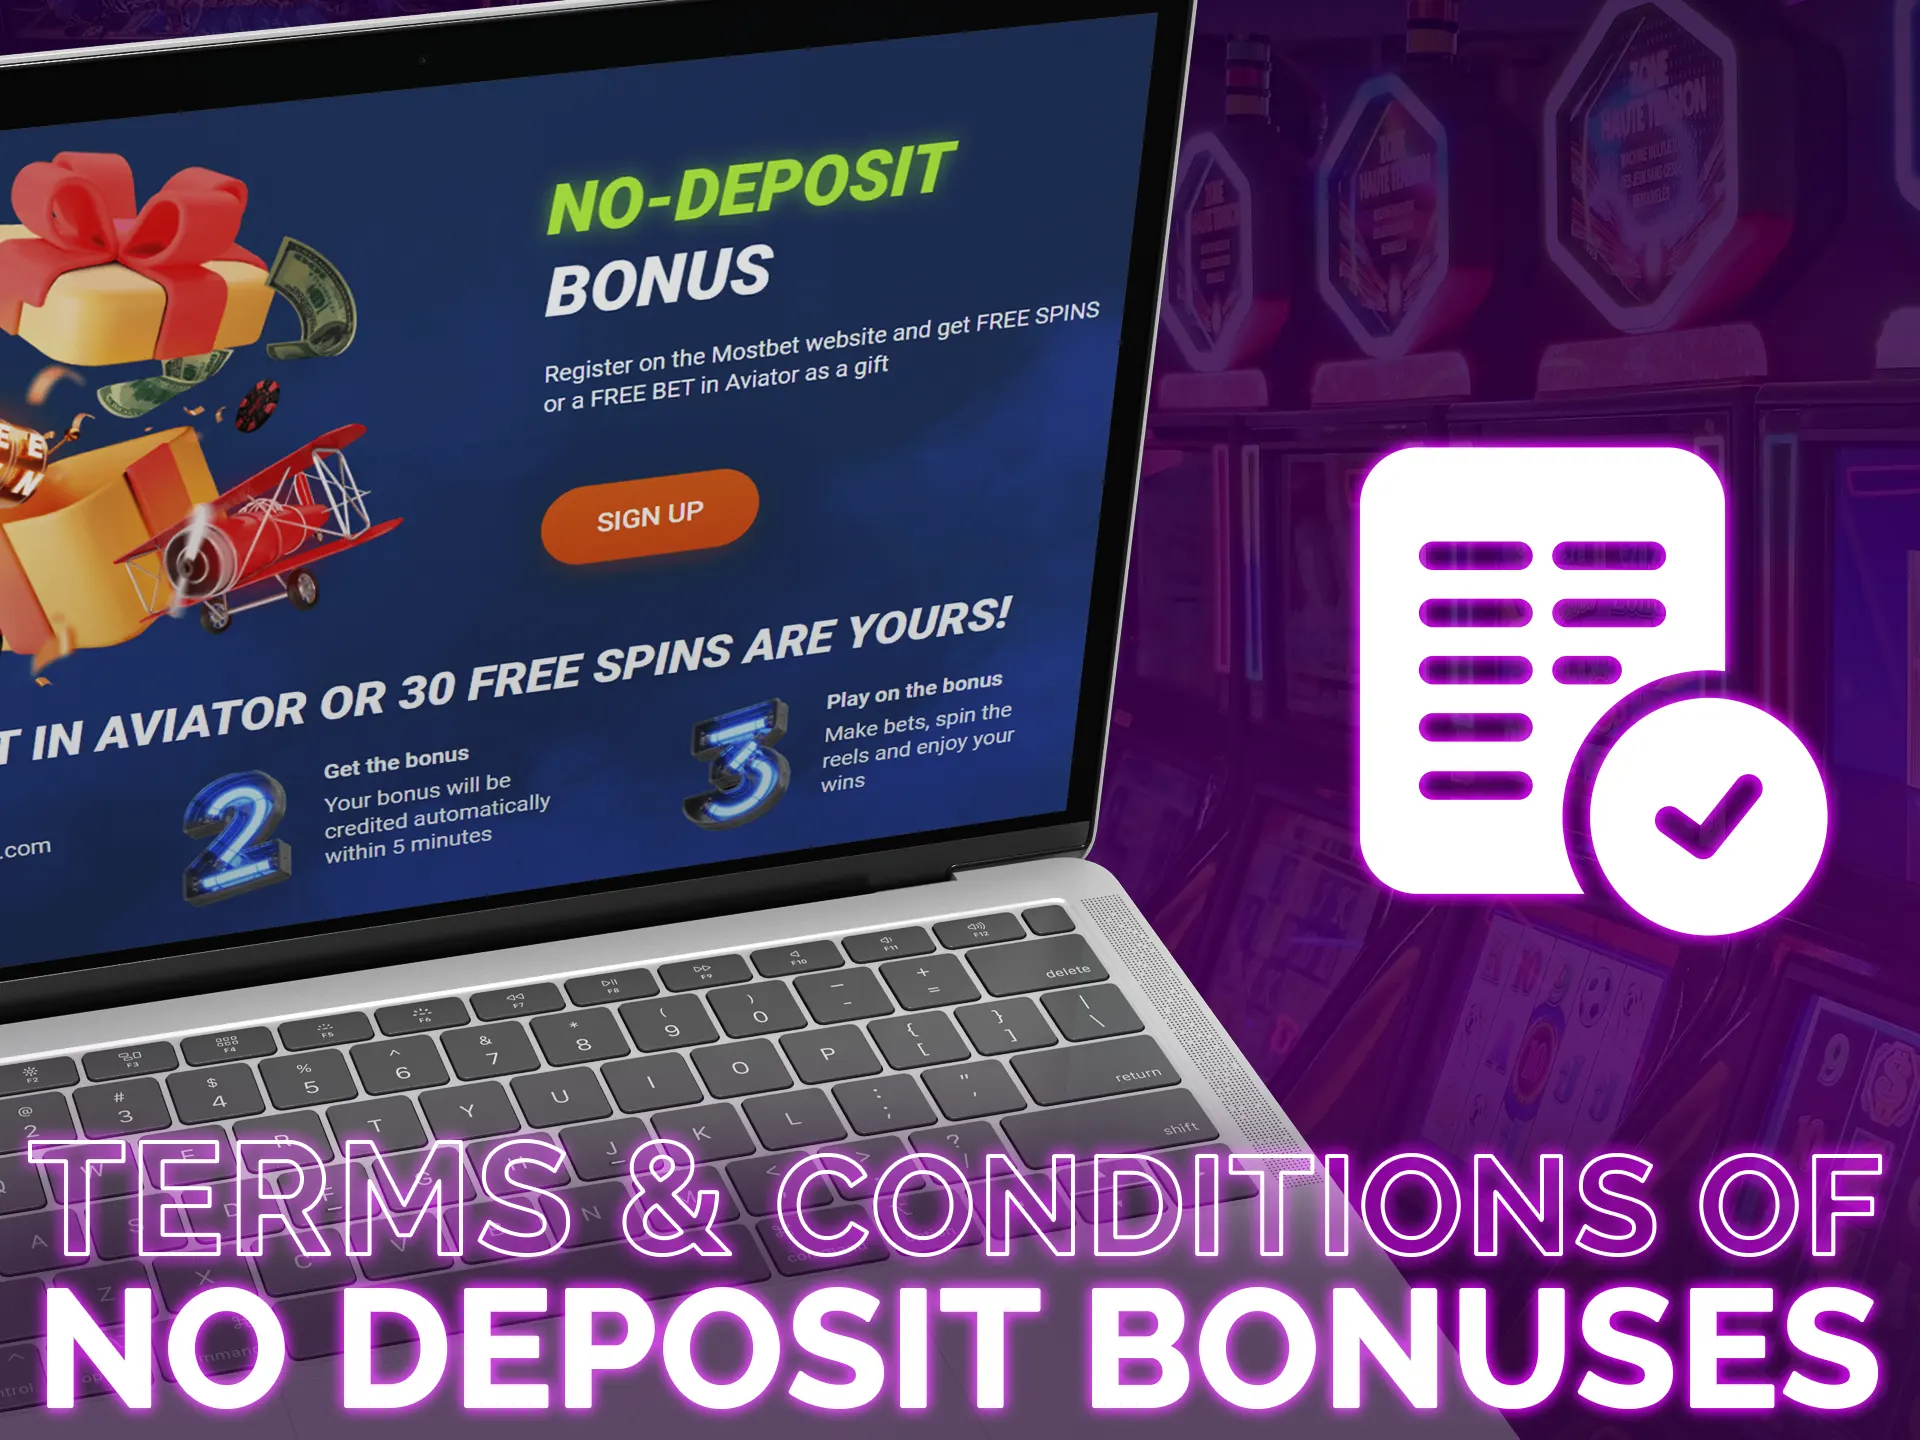 Read terms and conditions and get your no-deposit bonus!